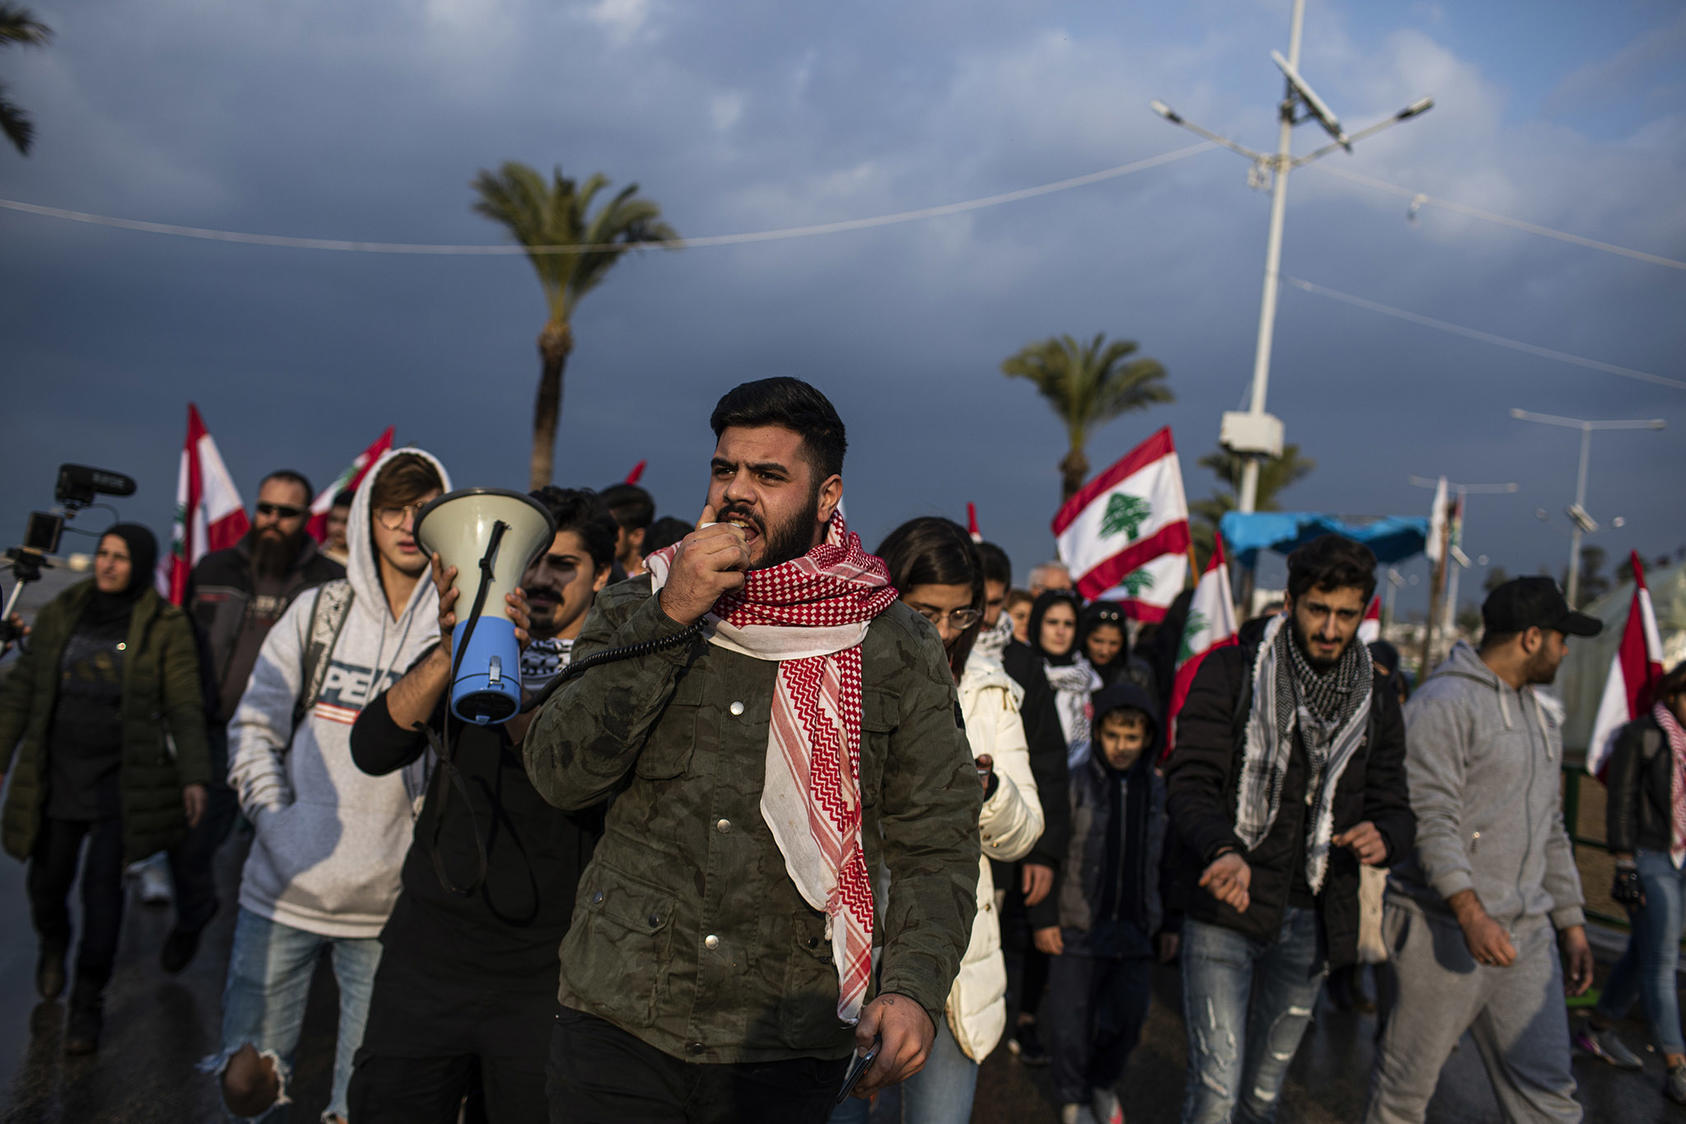 Demonstrators hit the streets in Tyre, Lebanon, Jan. 19, 2020. (Diego Ibarra Sanchez/The New York Times)